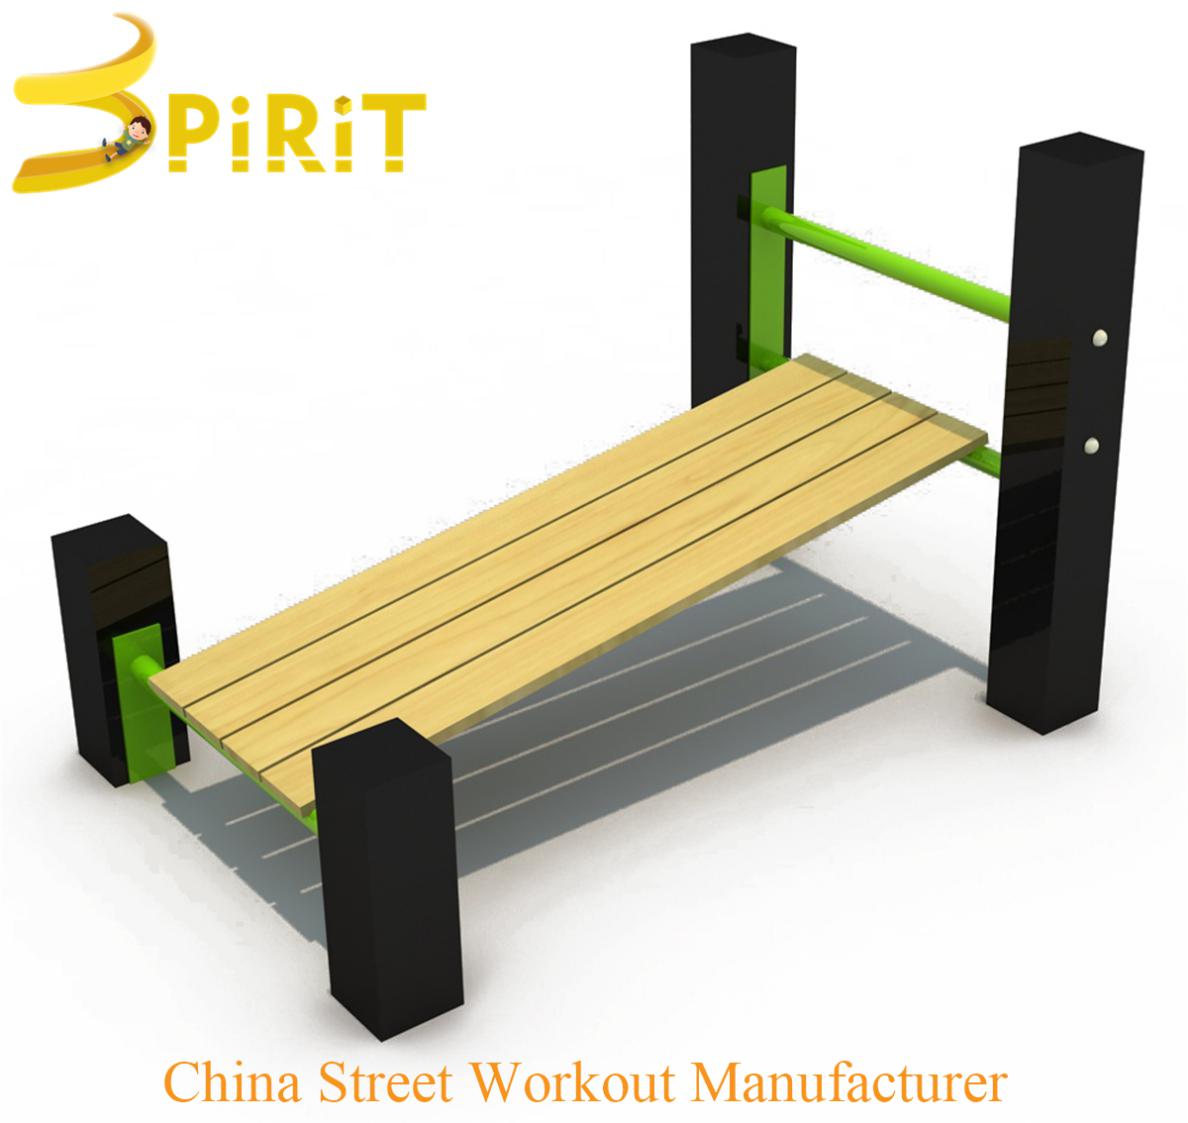 How to install the power systems workout bench in your backyard?-SPIRIT PLAY,Outdoor Playground, Indoor Playground,Trampoline Park,Outdoor Fitness,Inflatable,Soft Playground,Ninja Warrior,Trampoline Park,Playground Structure,Play Structure,Outdoor Fitness,Water Park,Play System,Freestanding,Interactive,independente ,Inklusibo, Park, Pagsaka sa Bungbong, Dula sa Bata